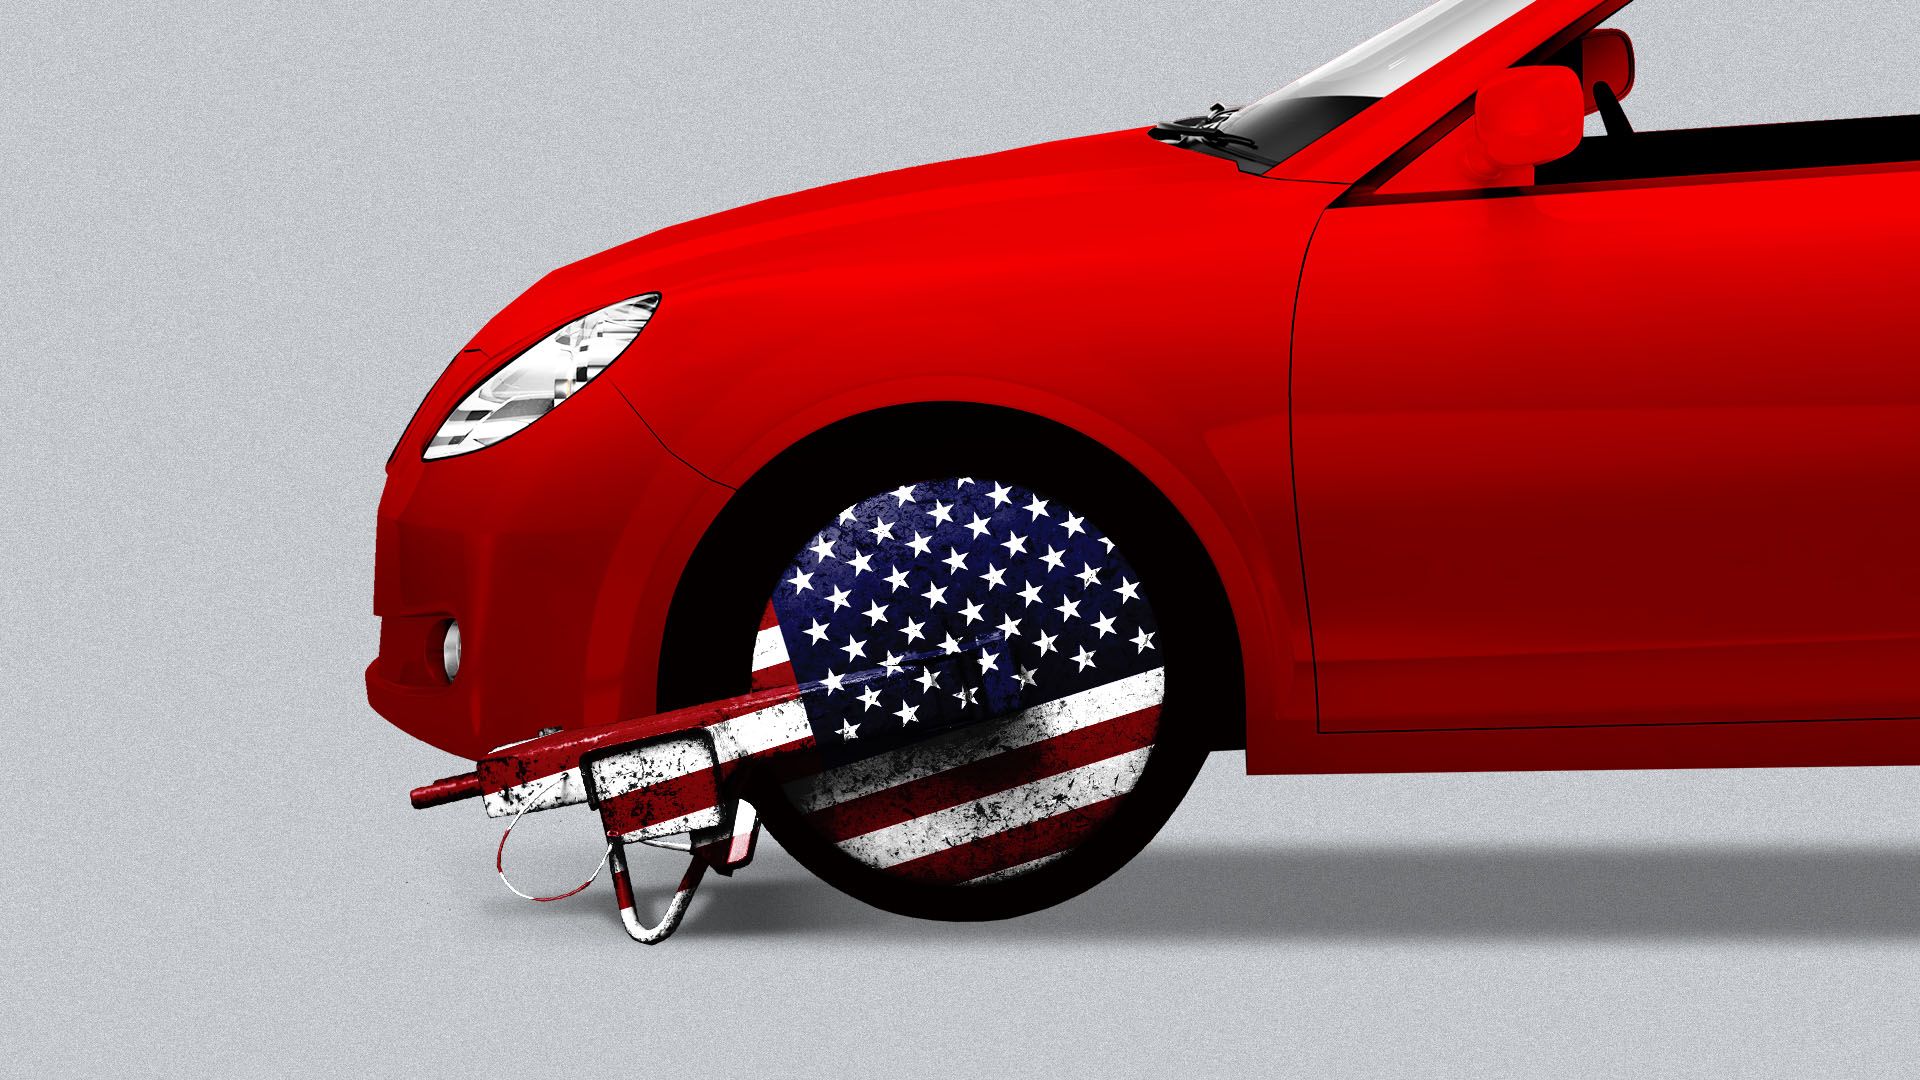 Illustration of of red car with an American flag boot on the tire